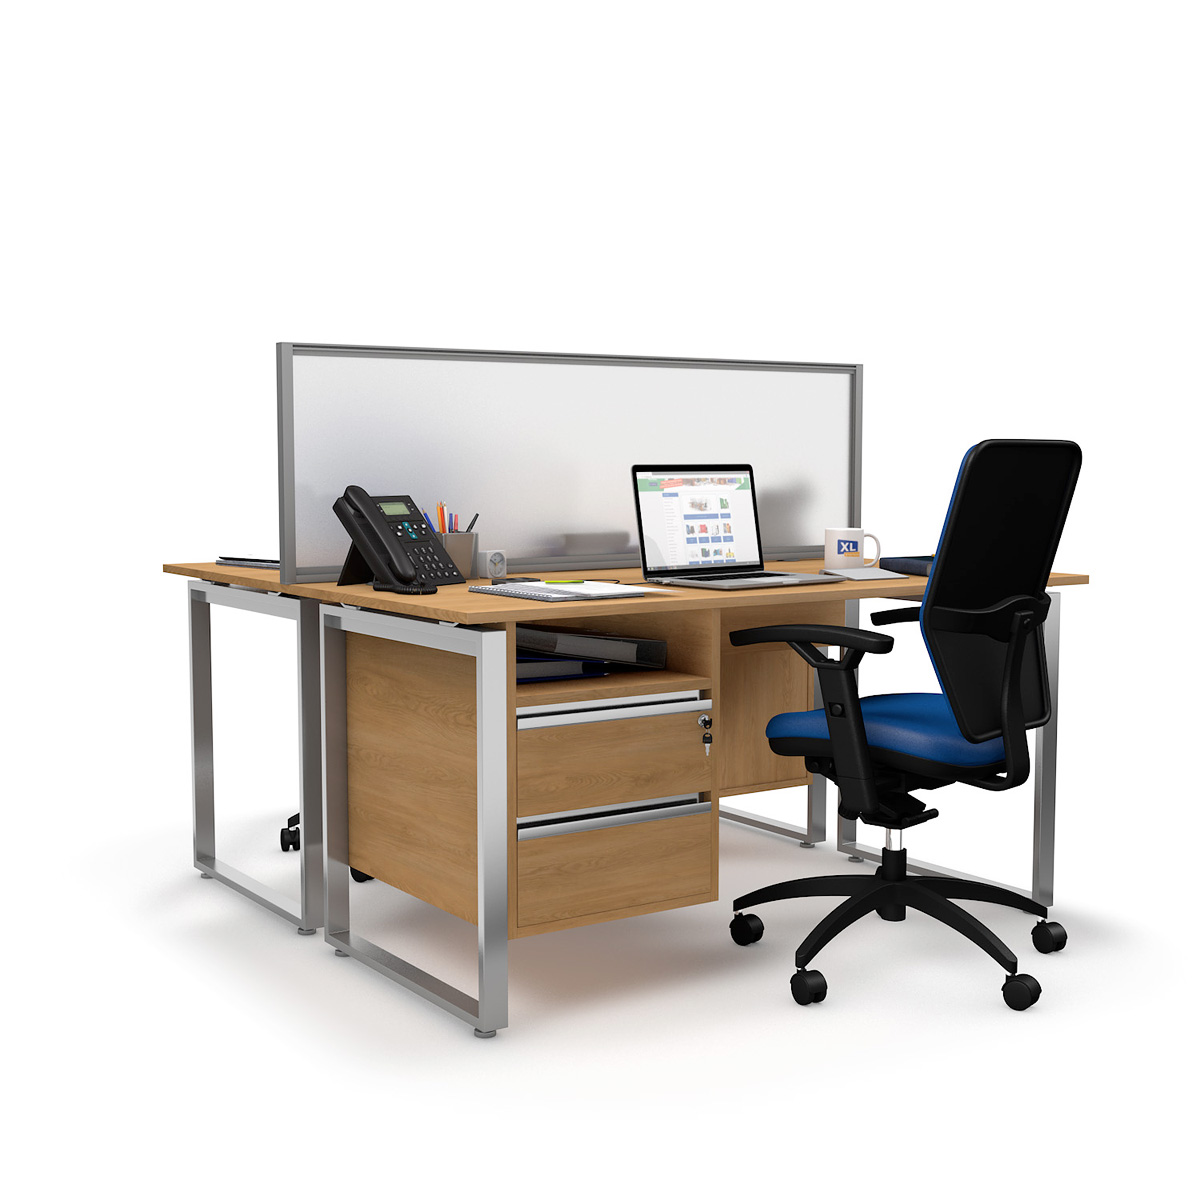 FRONTIER® Glazed Office Screen Desk Dividers 480mm High With Frosted Perspex® Screen Surface